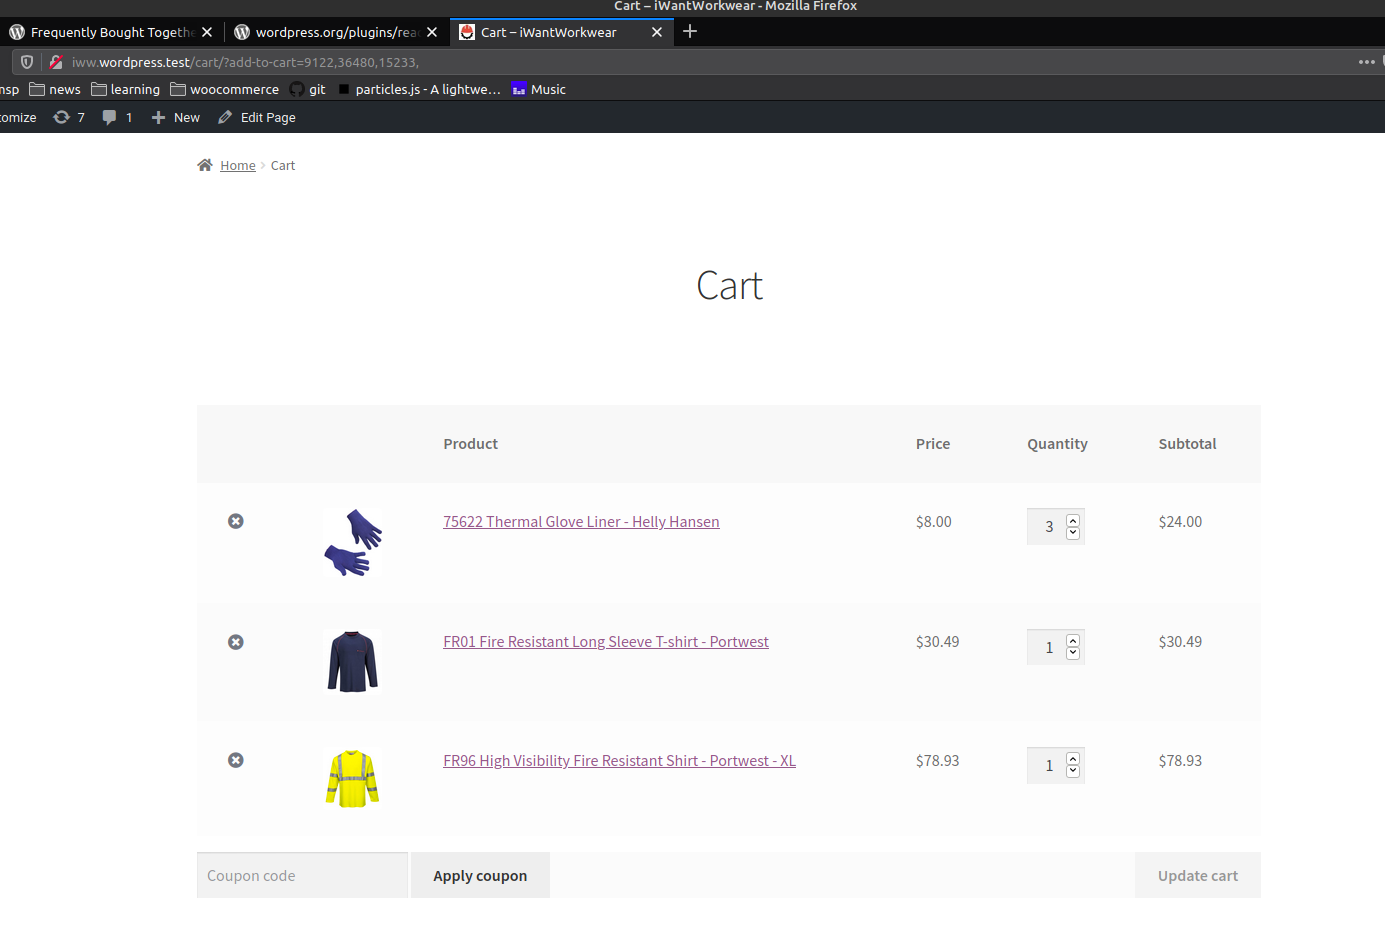 Adding everything to the cart with a simple click.